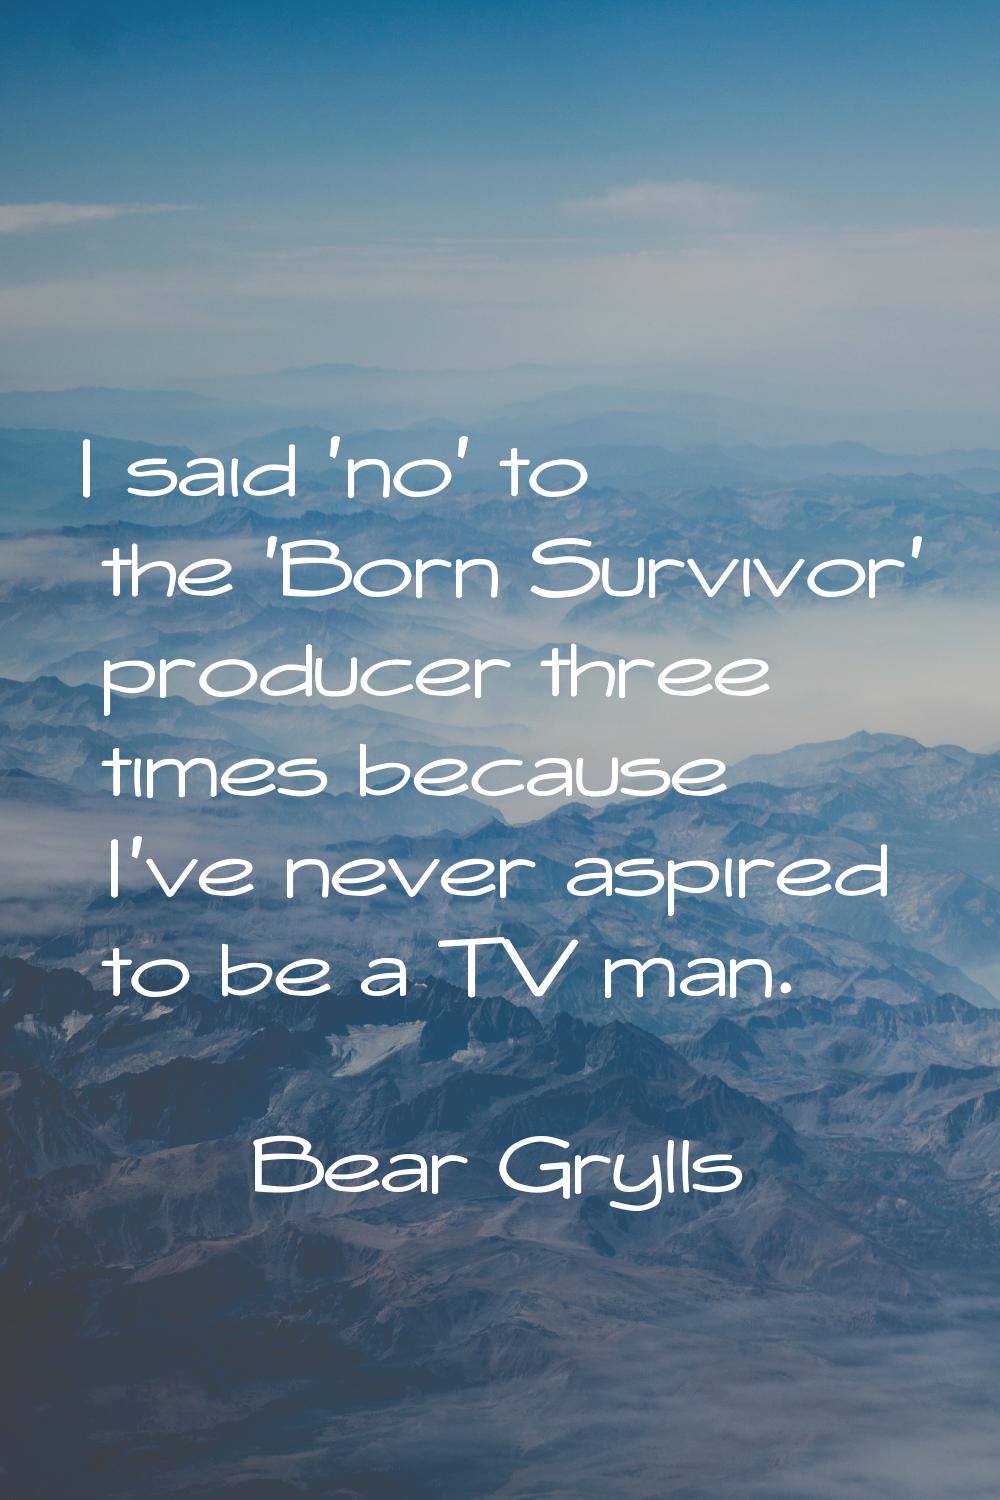 I said 'no' to the 'Born Survivor' producer three times because I've never aspired to be a TV man.